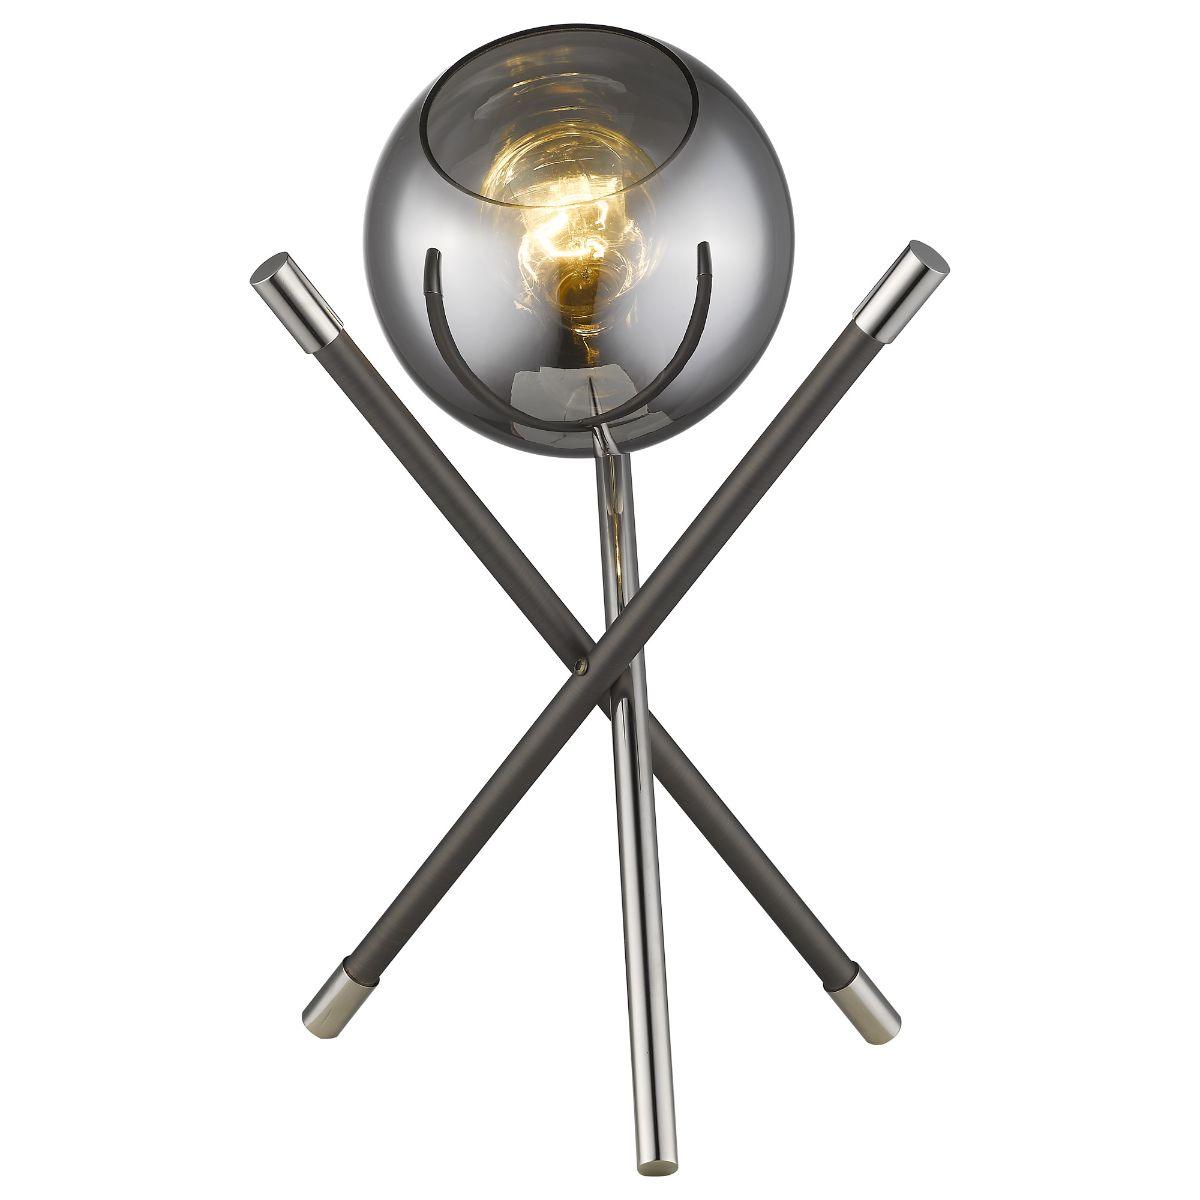 Trend Home 1 Light Table Lamp Polished Nickel Finish